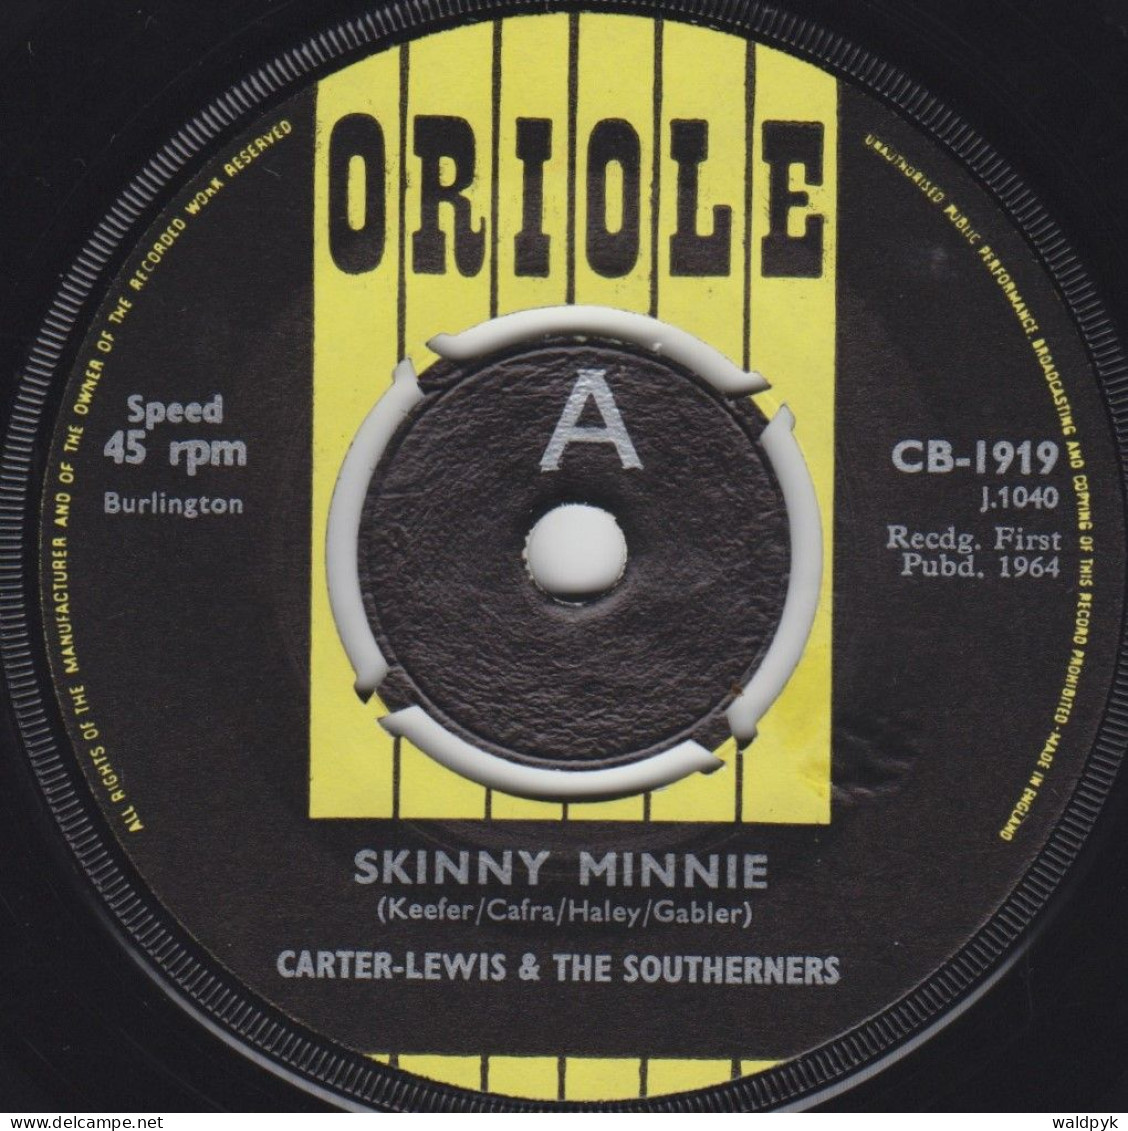 CARTER-LEWIS & THE SOUTHERNERS - Skinny Minnie - Other - English Music